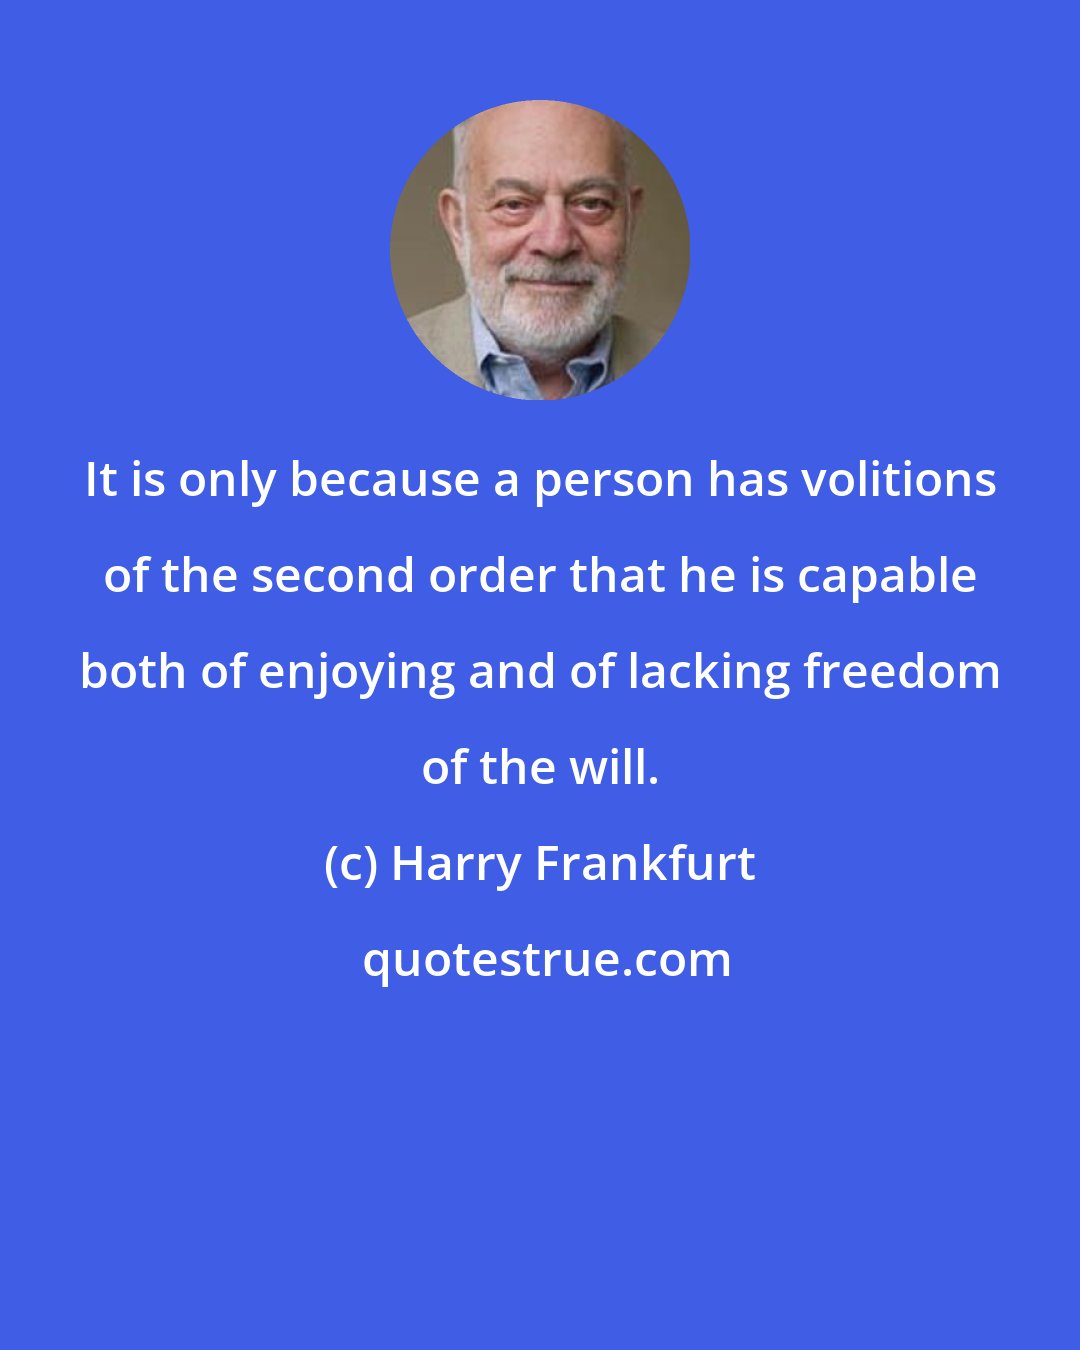 Harry Frankfurt: It is only because a person has volitions of the second order that he is capable both of enjoying and of lacking freedom of the will.